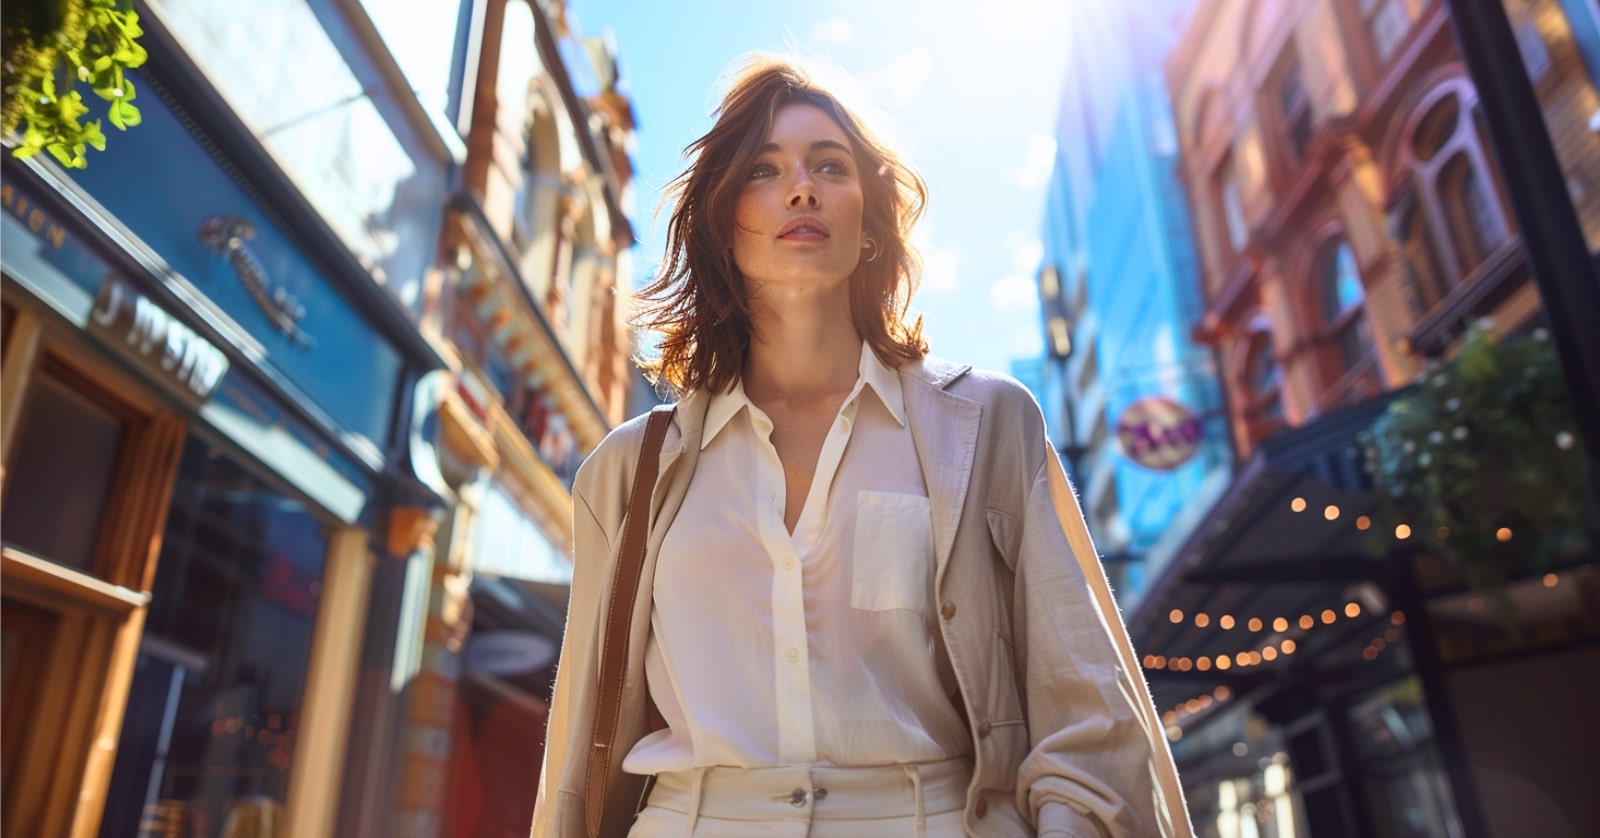 A classy-looking young lady in sophisticated casual clothing walks down a city side street with blue skies above her